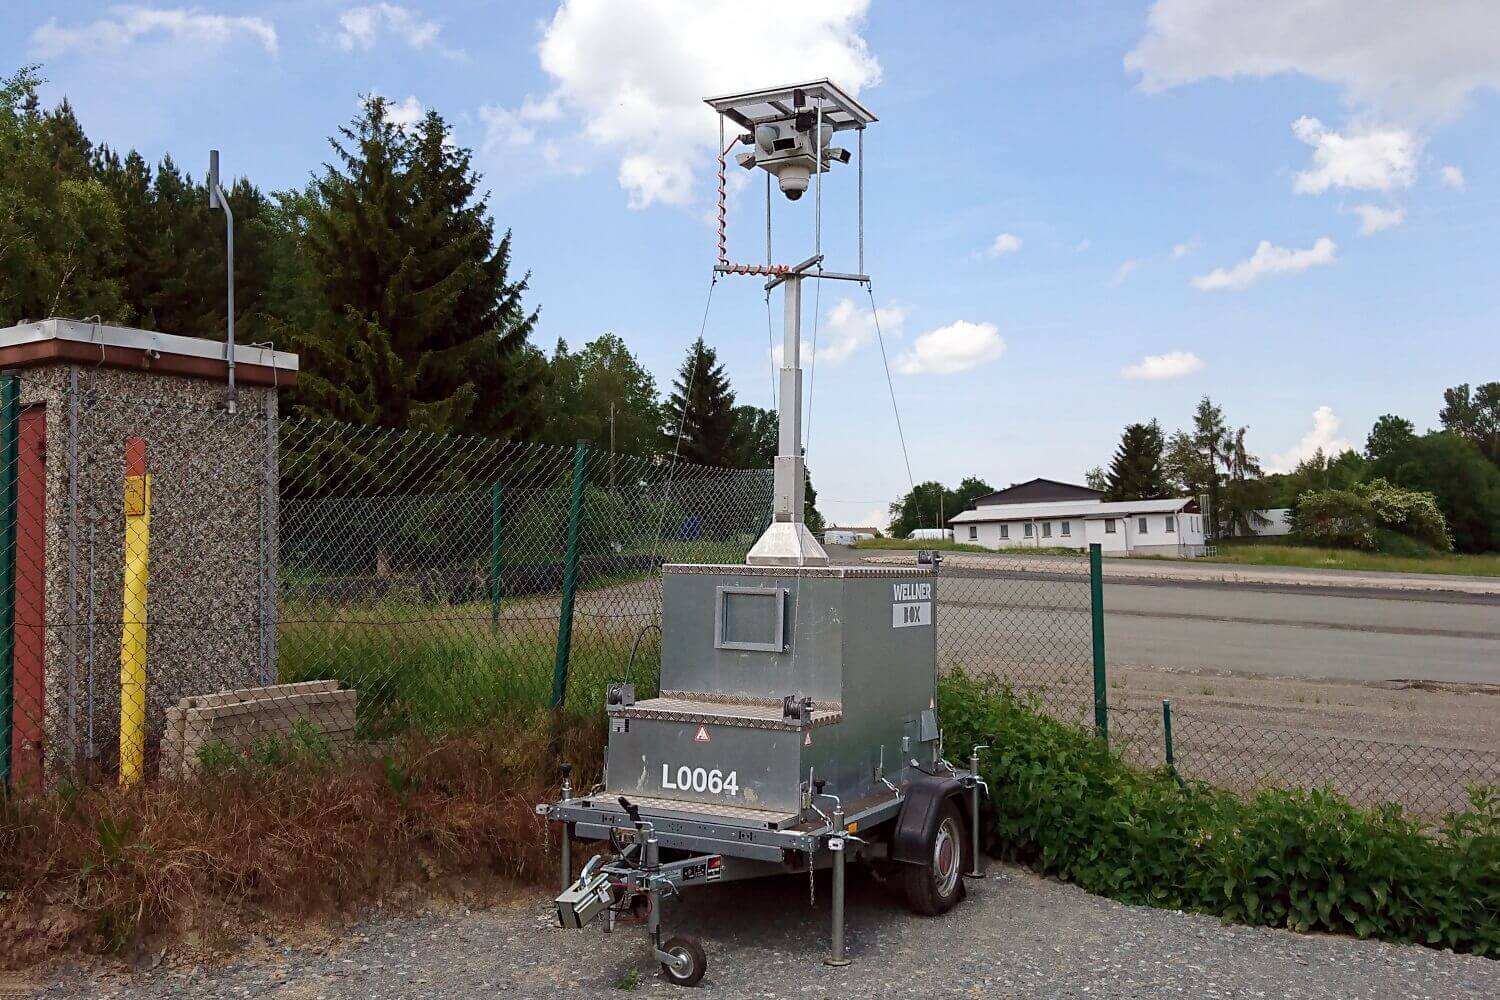 WellnerBOX in a typical area of application in isolated outdoor locations.